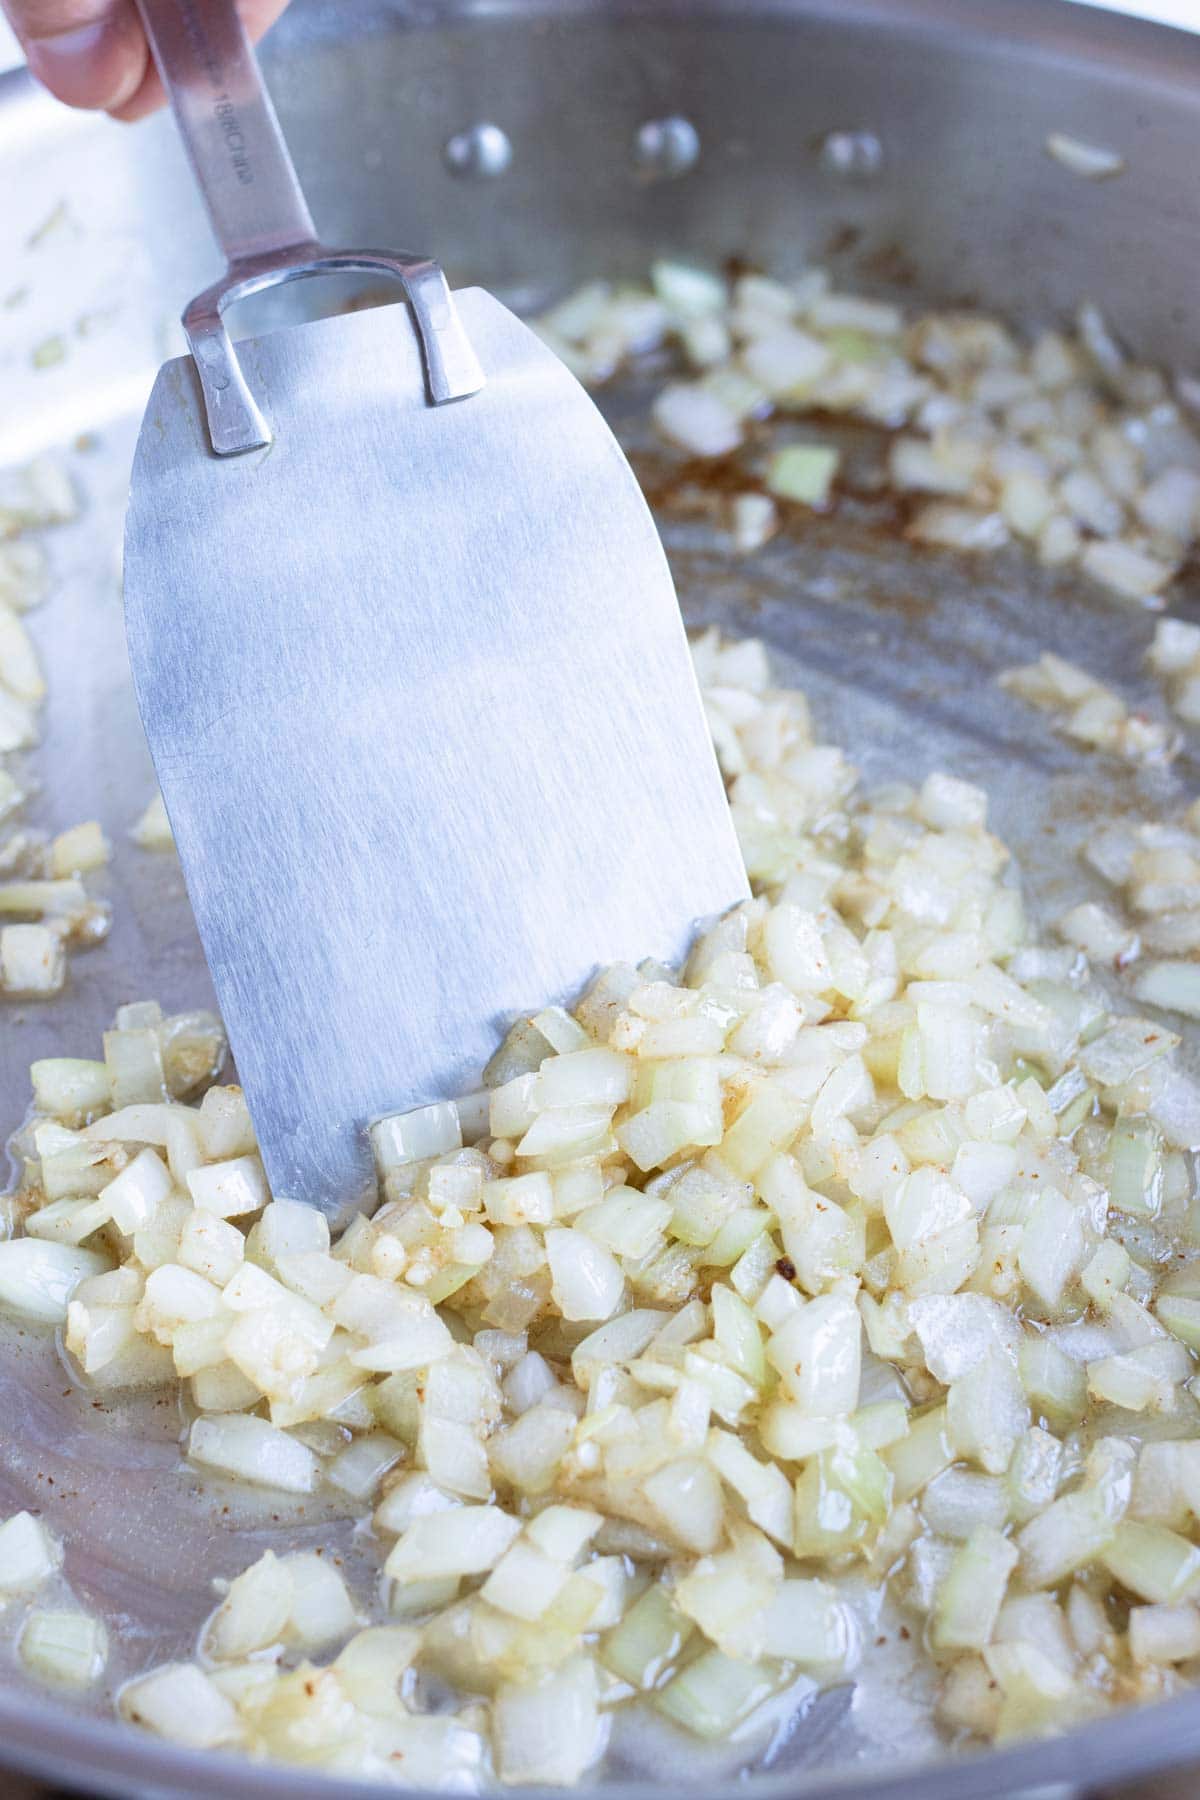 Diced onions are cooked on the stove.